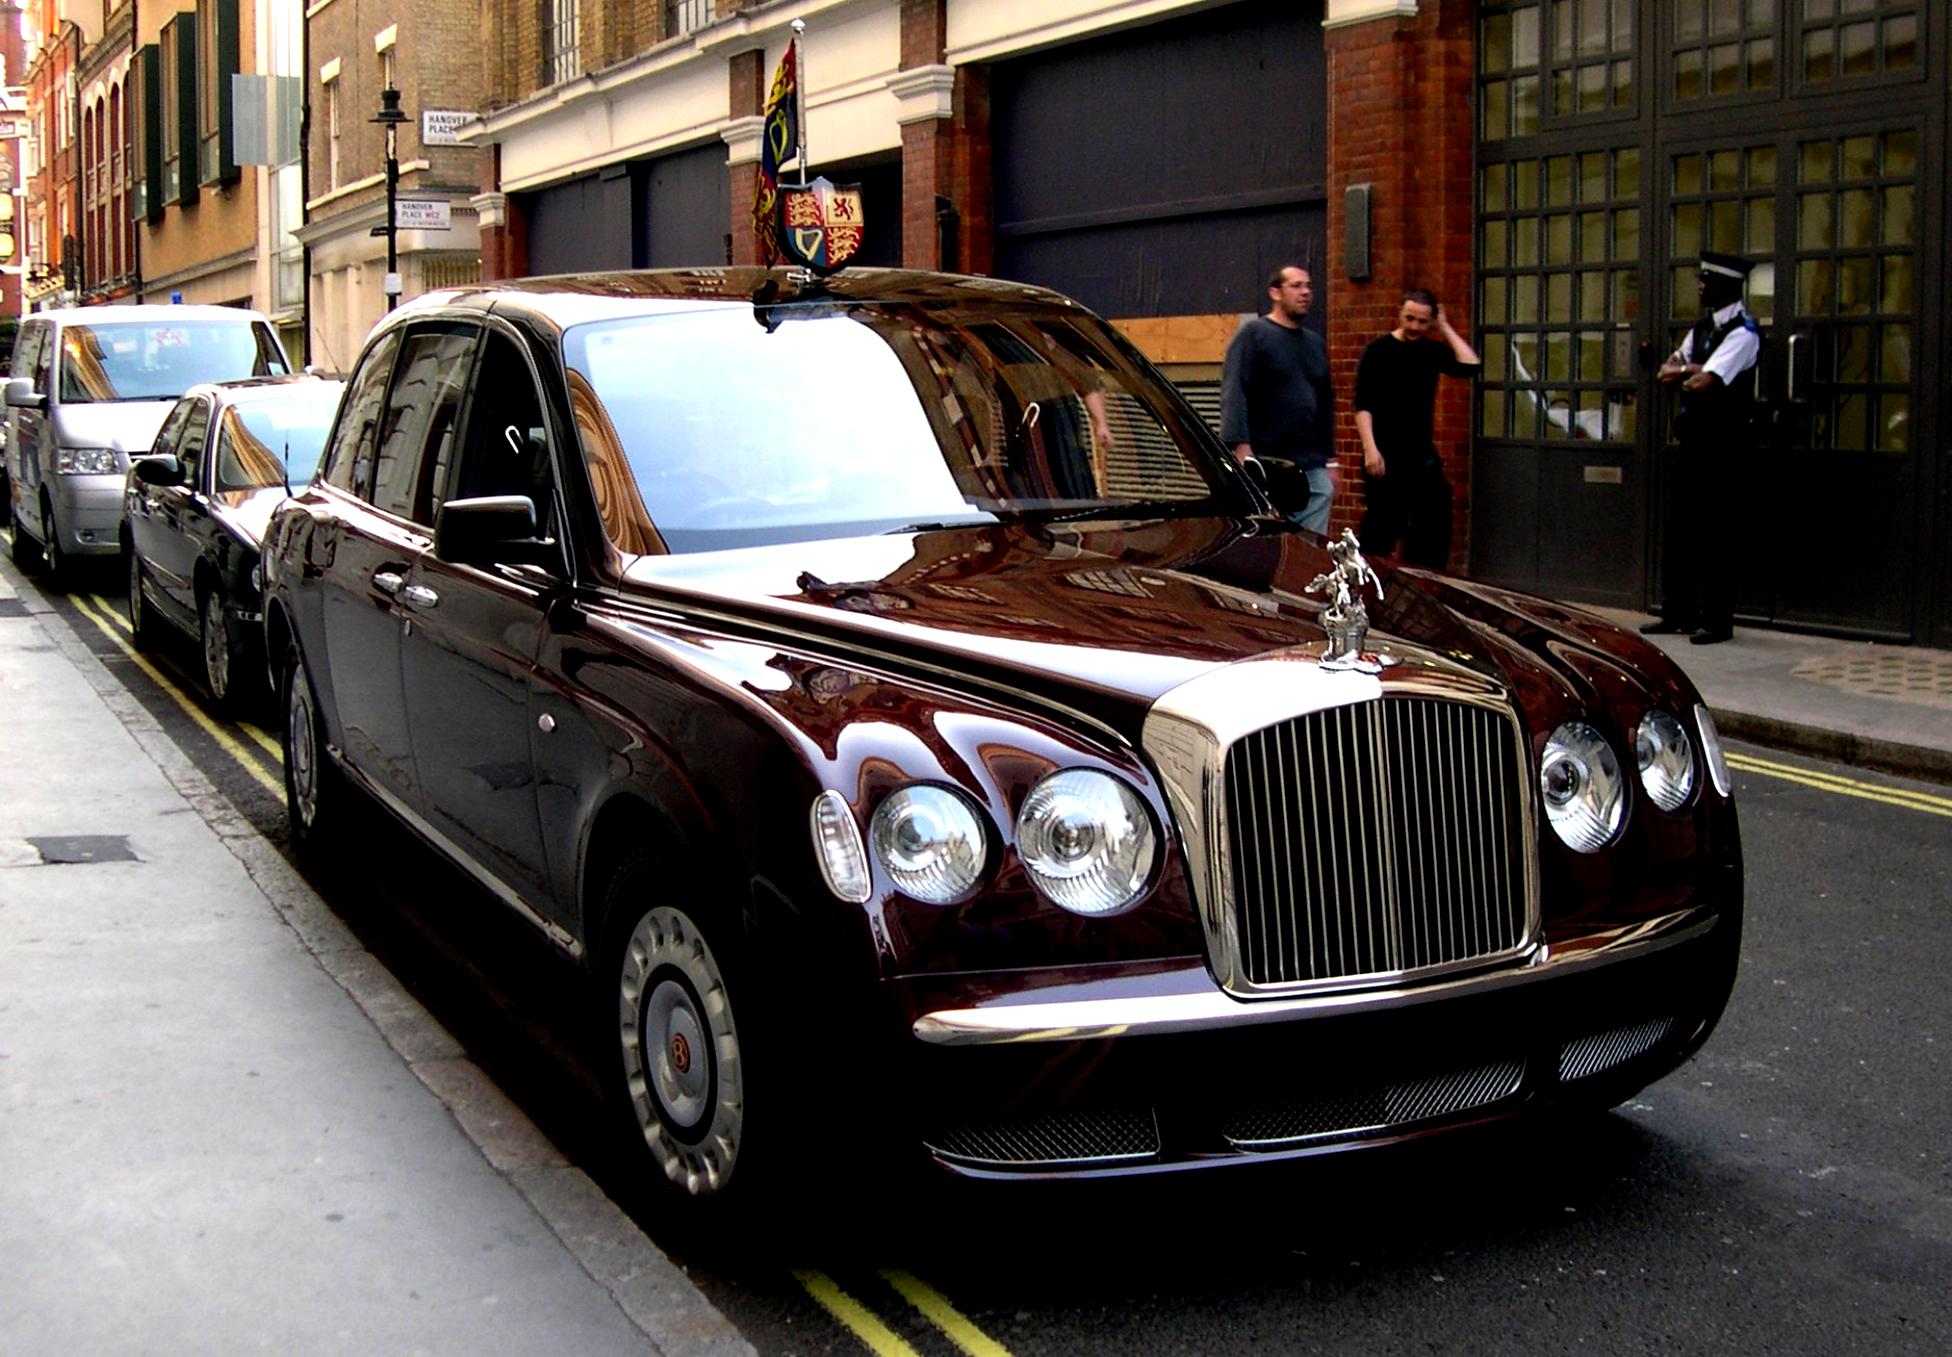 Bentley State Limousine 2002 #2